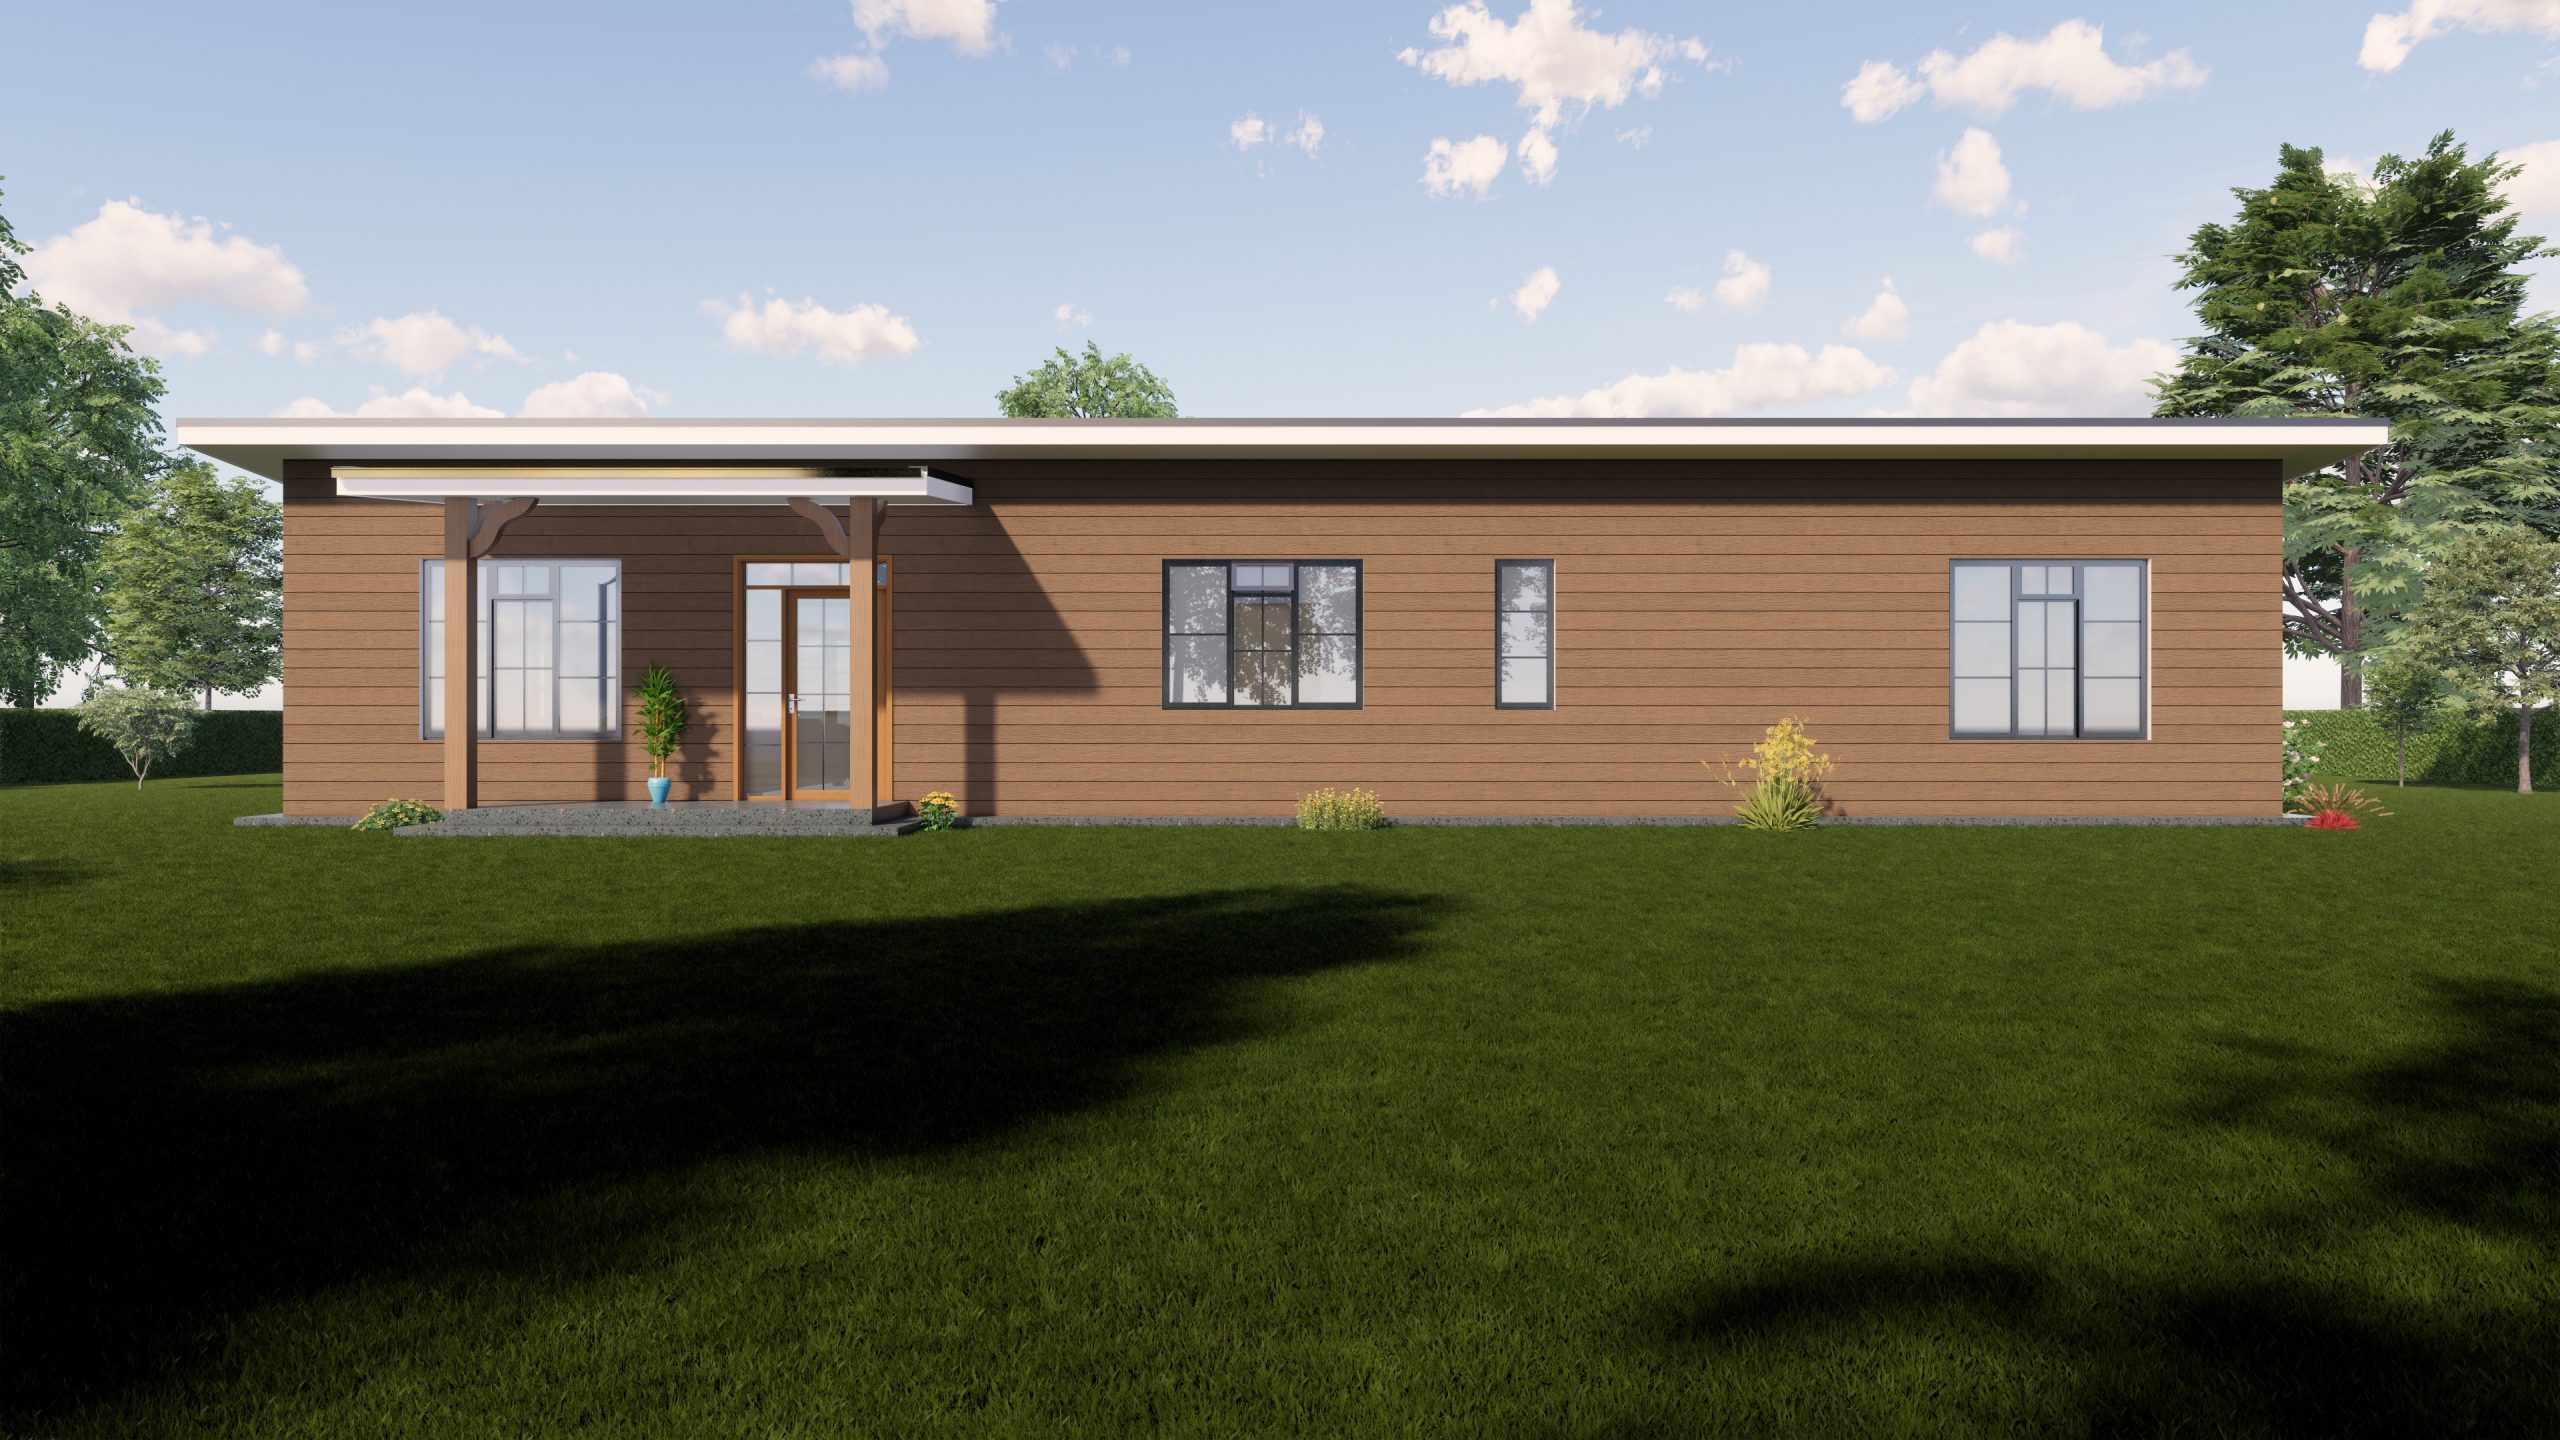 A Lucid Two Bedroom Bungalow House Plan